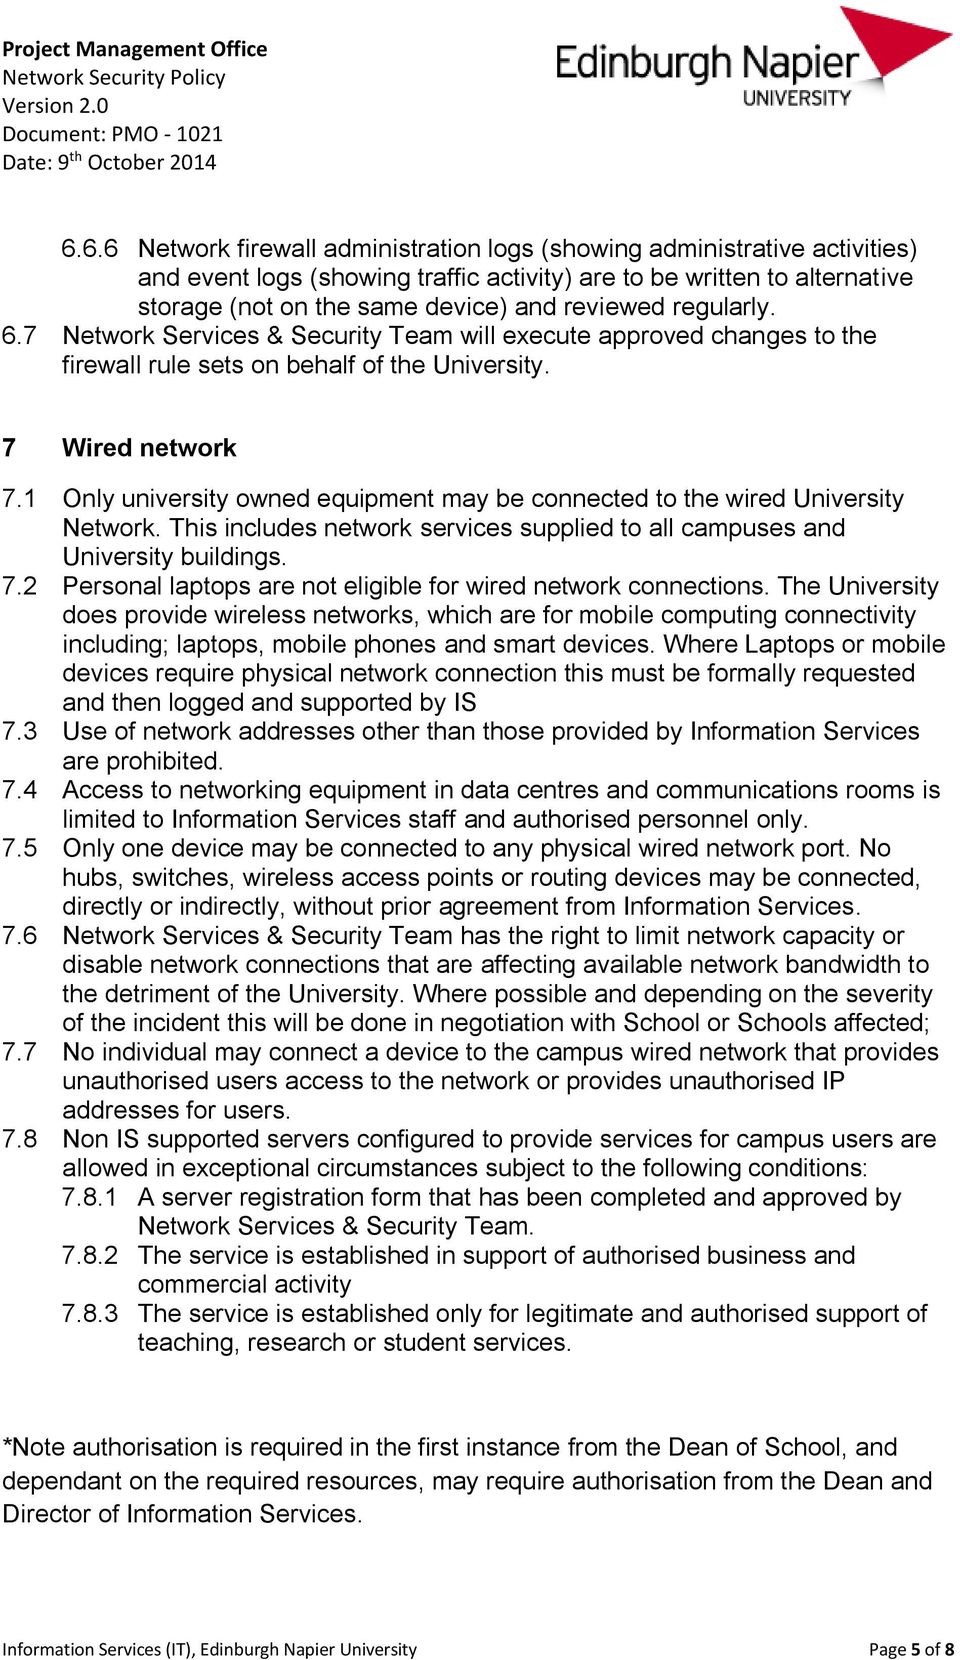 1 Only university owned equipment may be connected to the wired University Network. This includes network services supplied to all campuses and University buildings. 7.